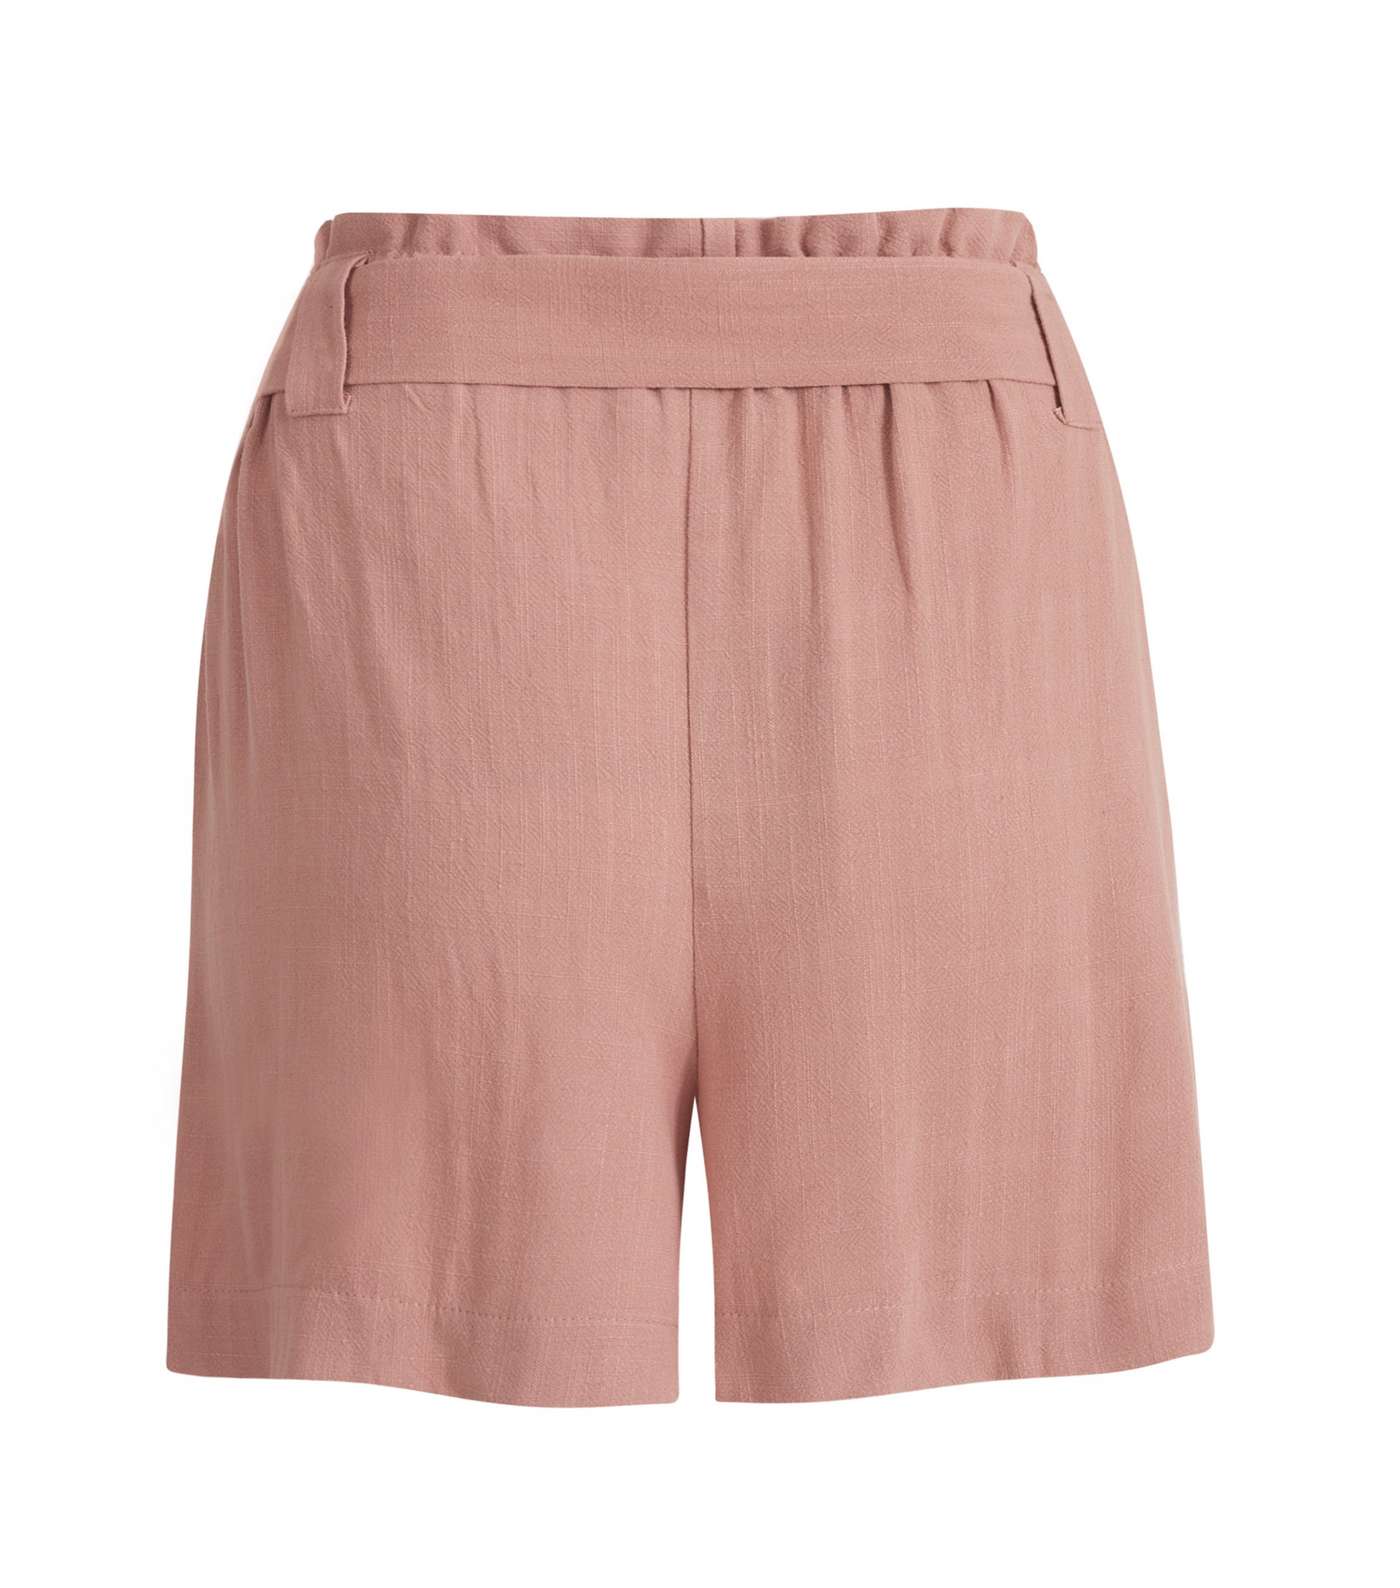 Pale Pink Linen Look Buckle Shorts Image 2